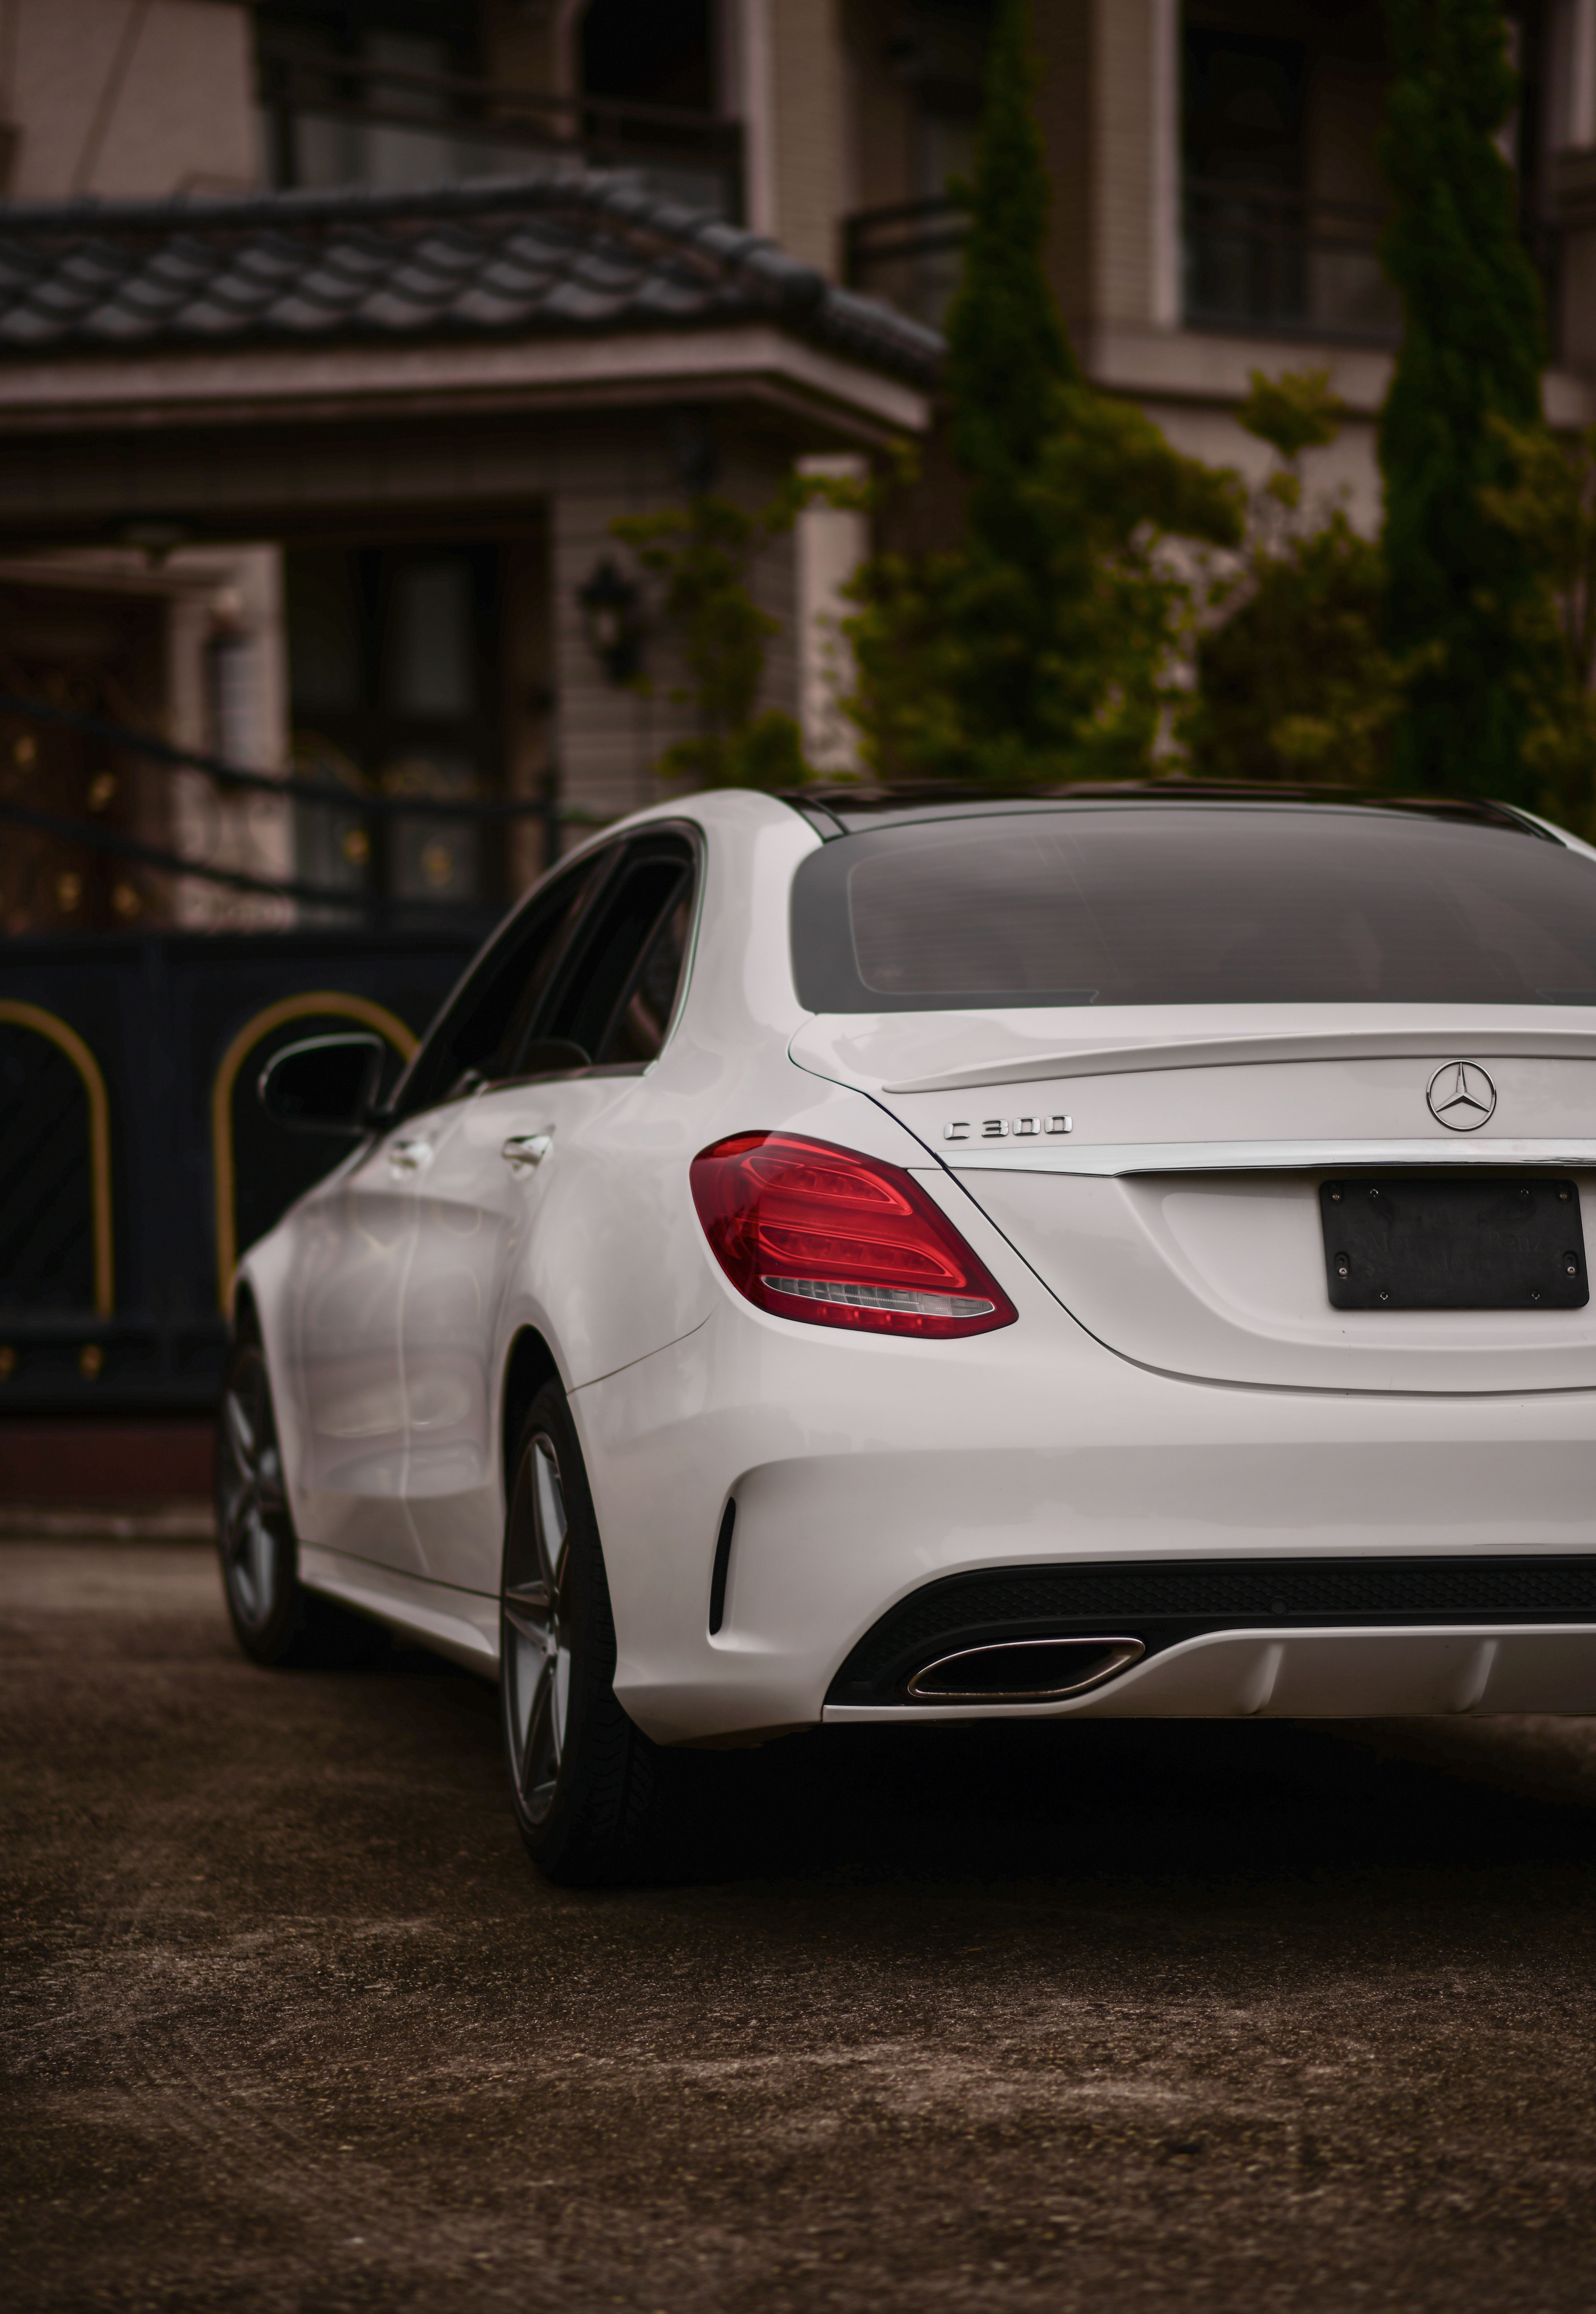 mercedes, mercedes benz c300, cars, white, car, back view, rear view cell phone wallpapers